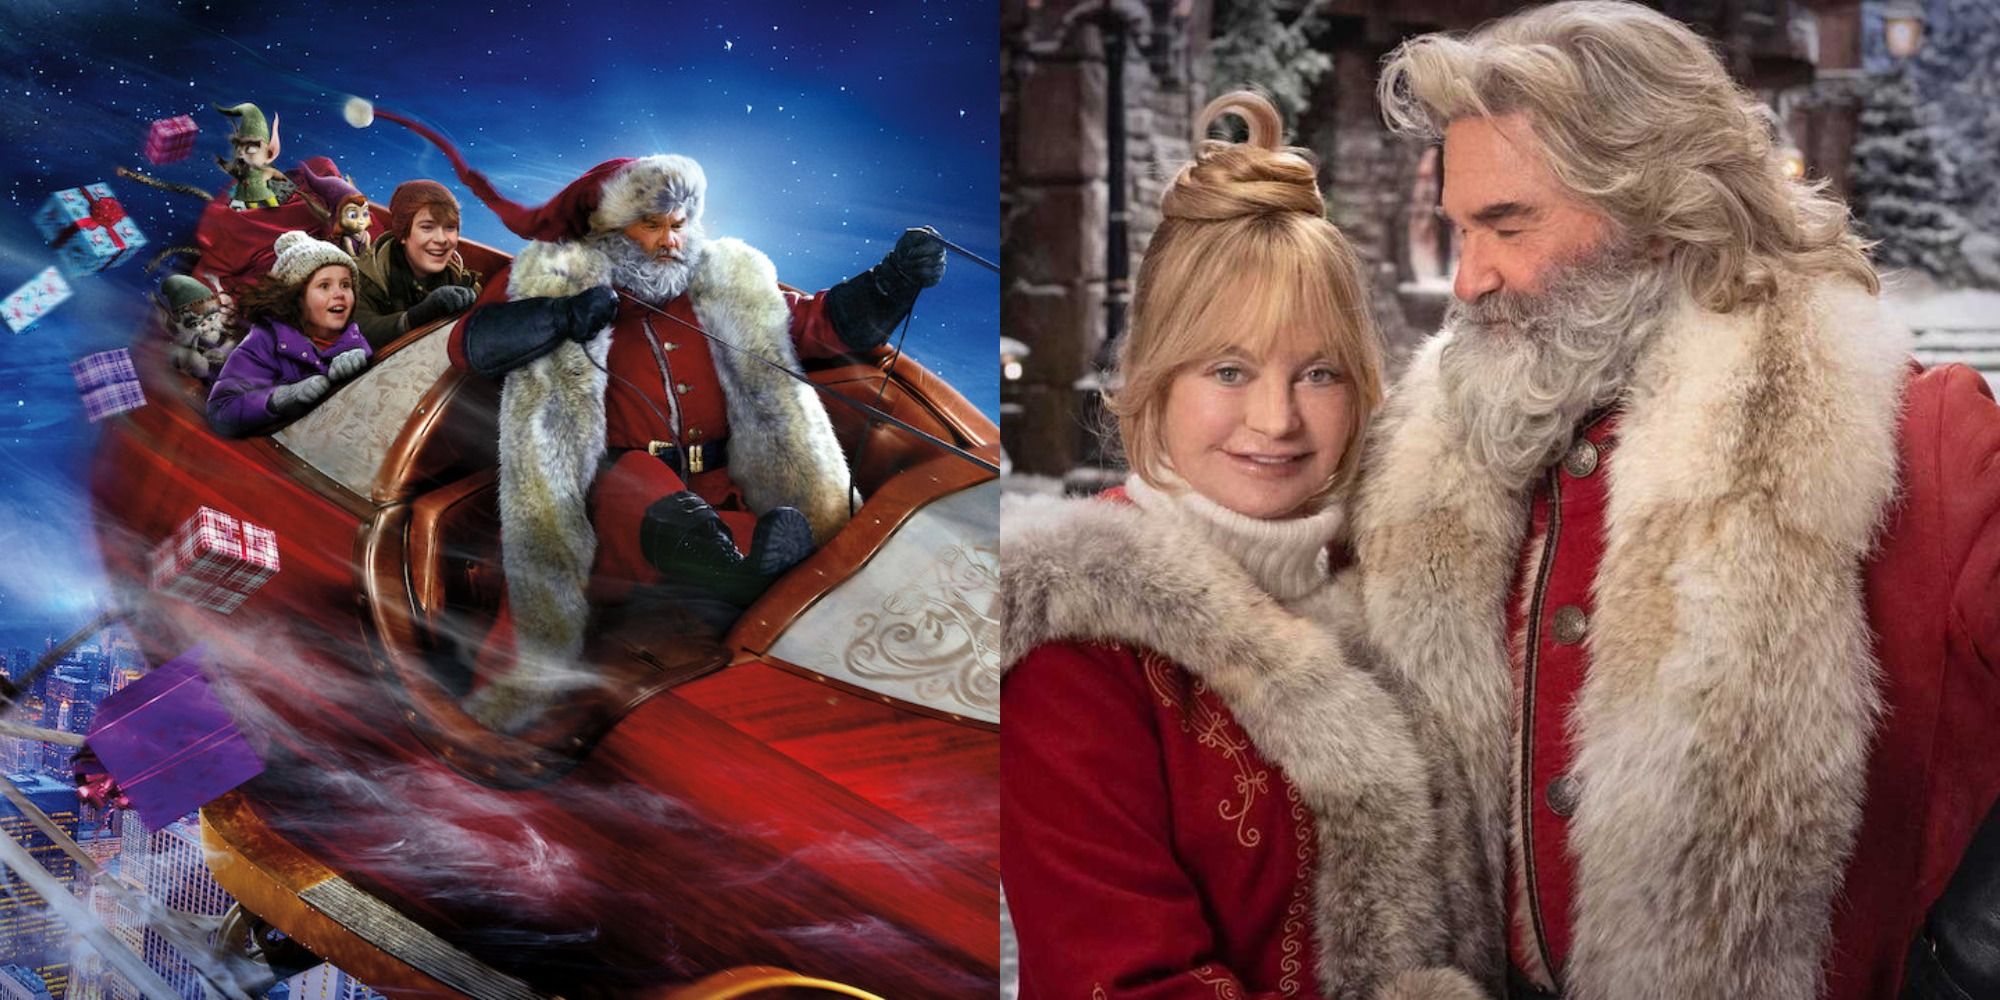 Two side by side images from the Christmas Chronicles